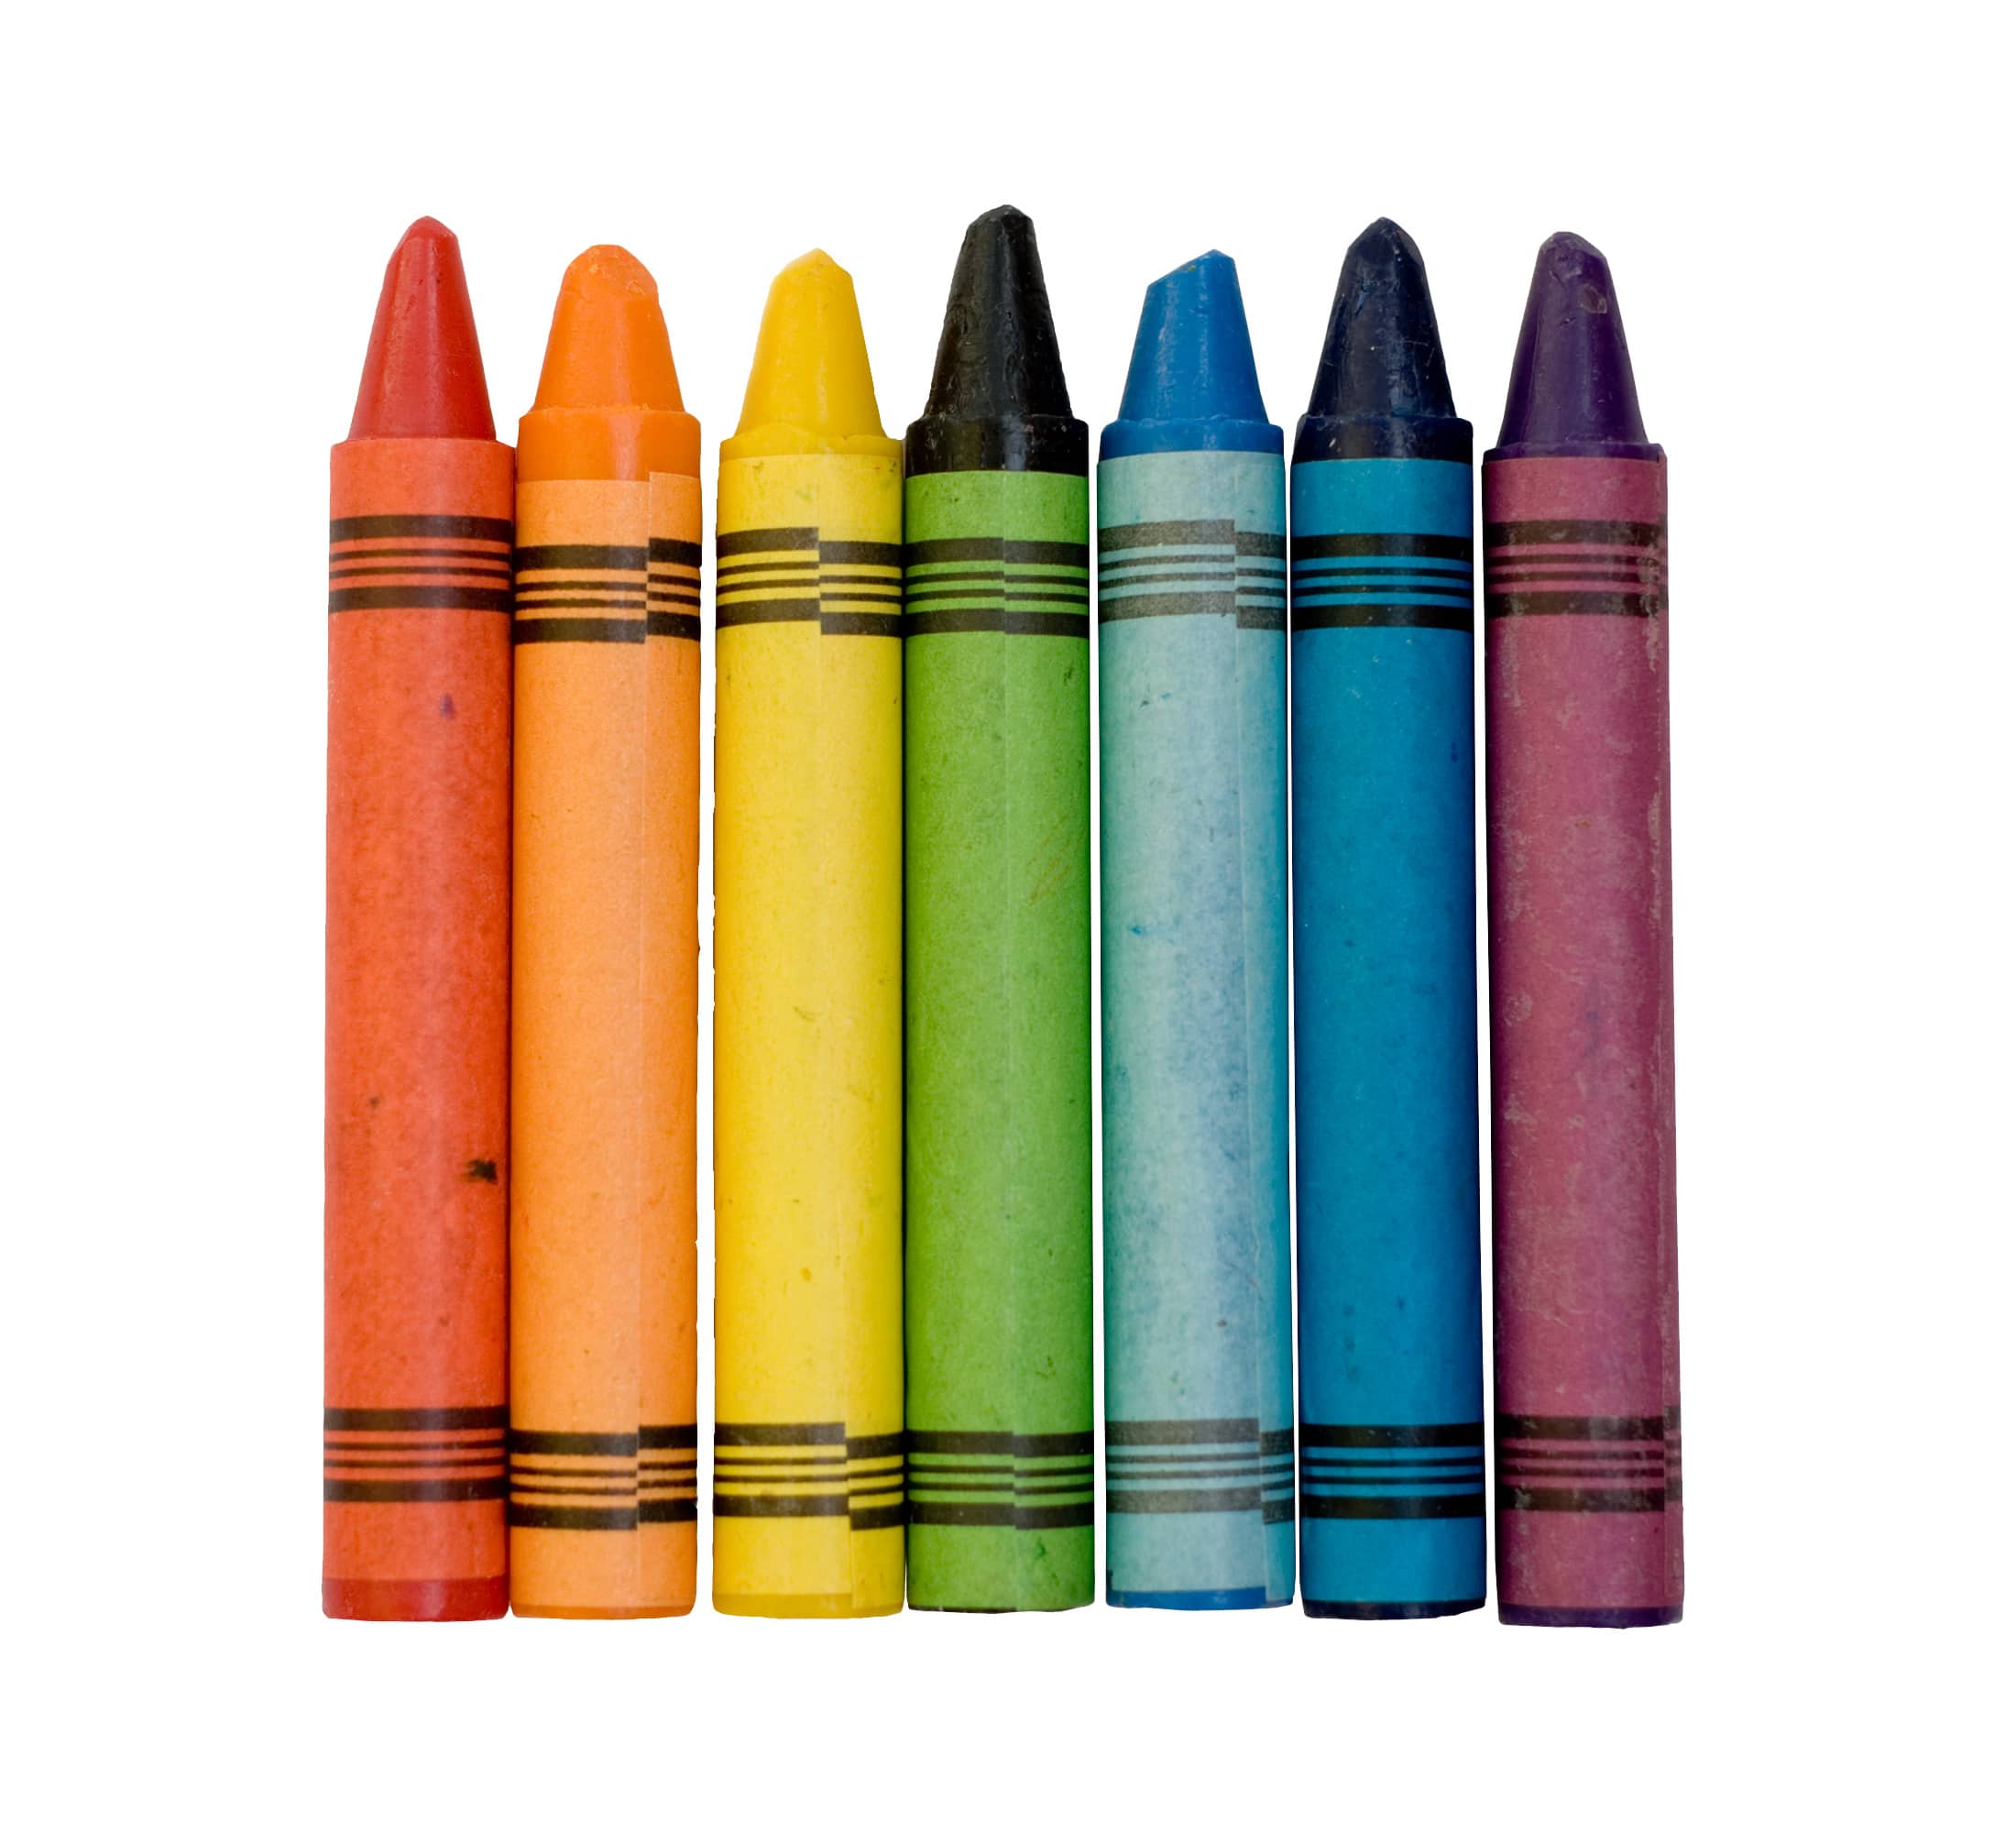 Seven used colored vax crayons form rainbow